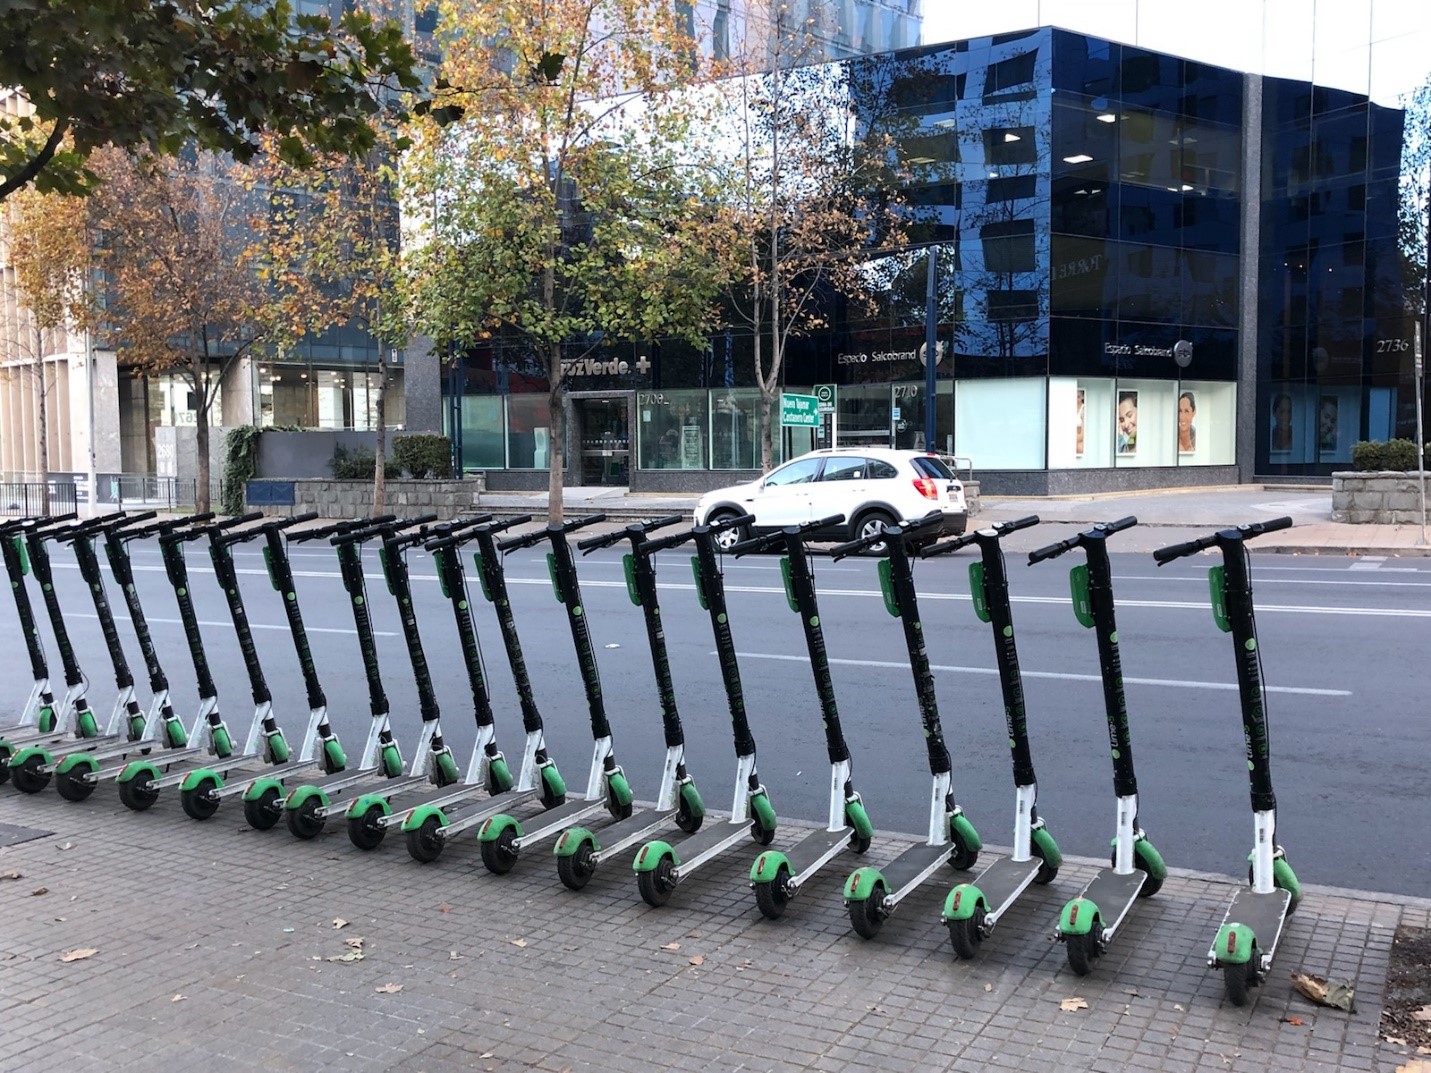 Are shared e-scooters good for the planet? Only if they replace car trips